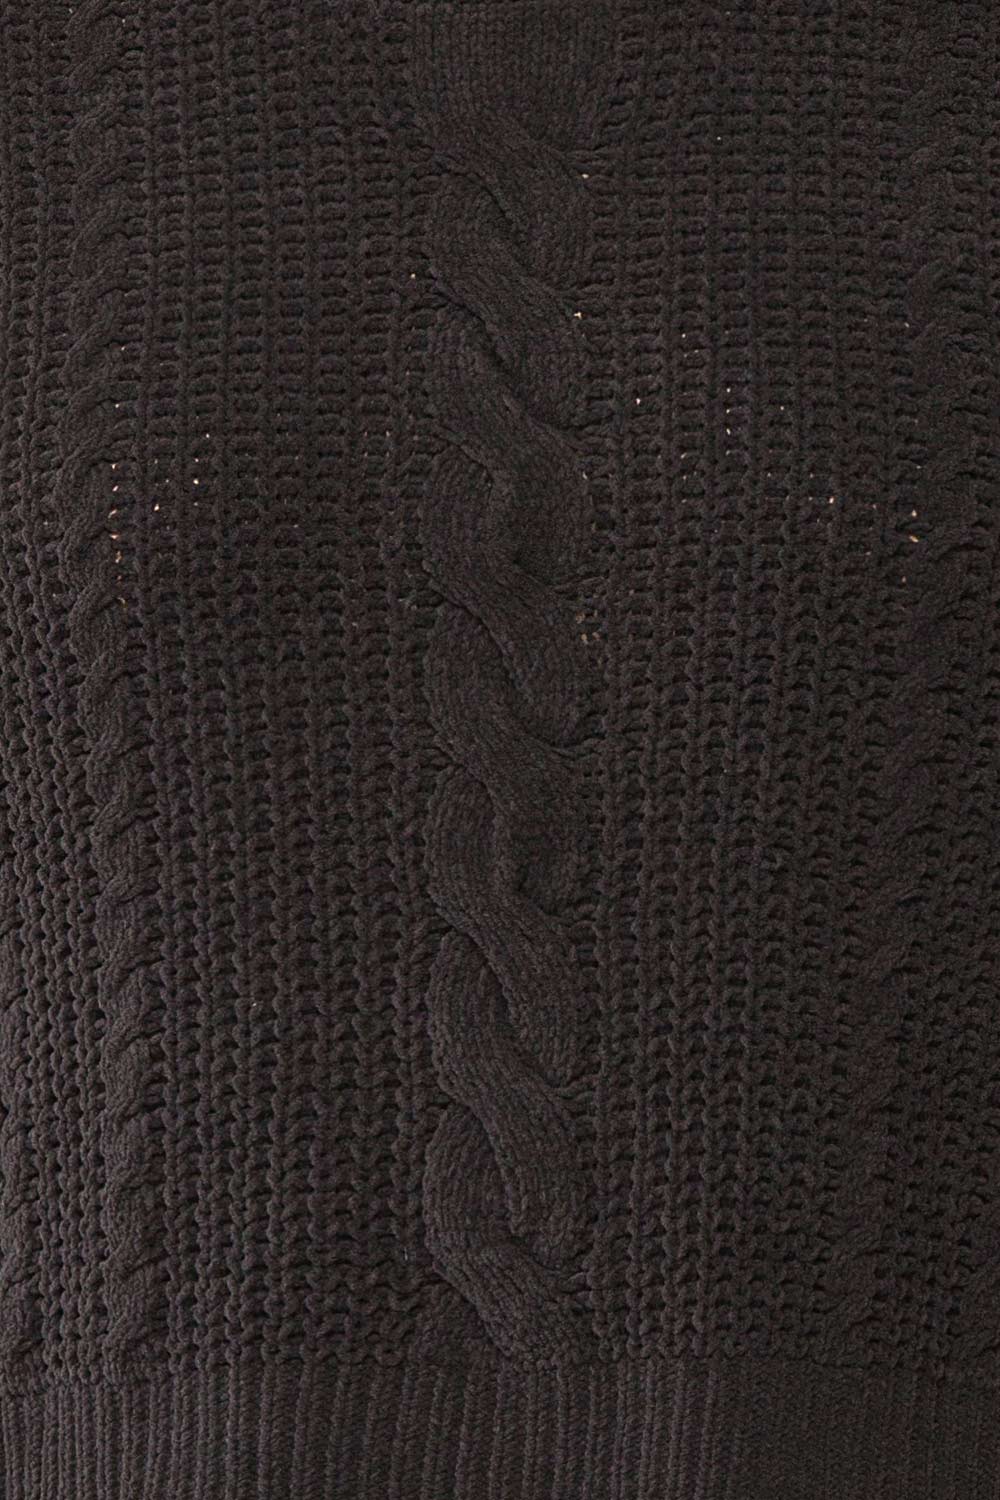 Madeleine Black Cropped Cable Knit Sweater | Boutique 1861 fabric 